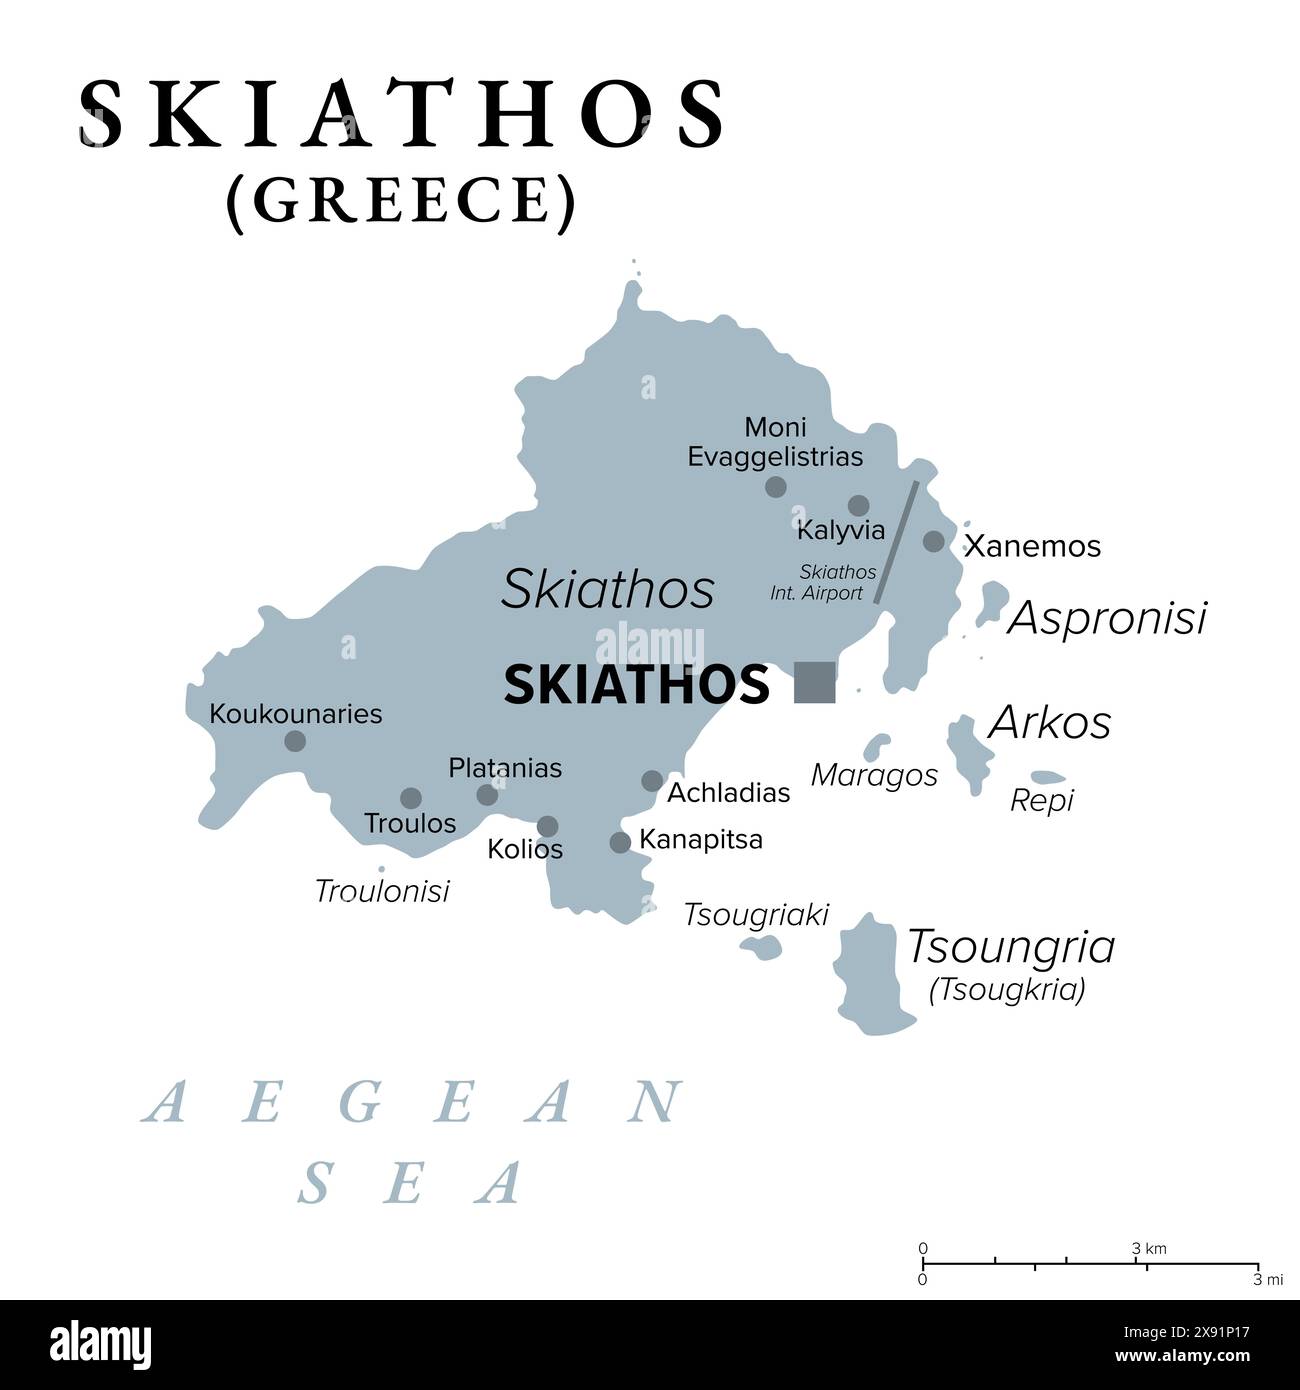 Skiathos, small Greek island, gray political map. Island in the Aegean Sea, part of Sporades, with the main town Skiathos, and with neighboring islets. Stock Photo